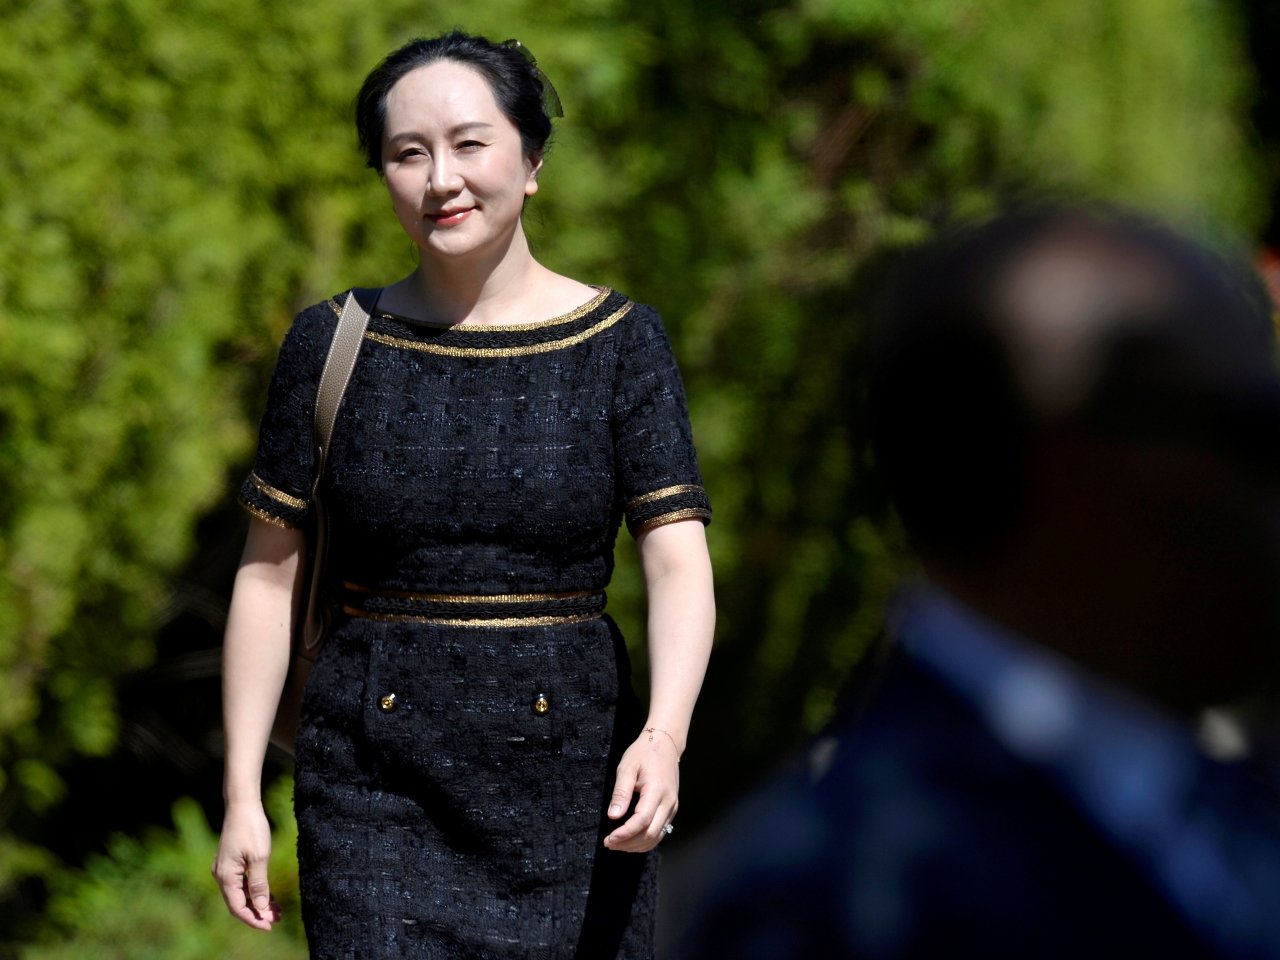 Canadian Intelligence: The arrest of Huawei Founder’s daughter will cause global Shock Waves